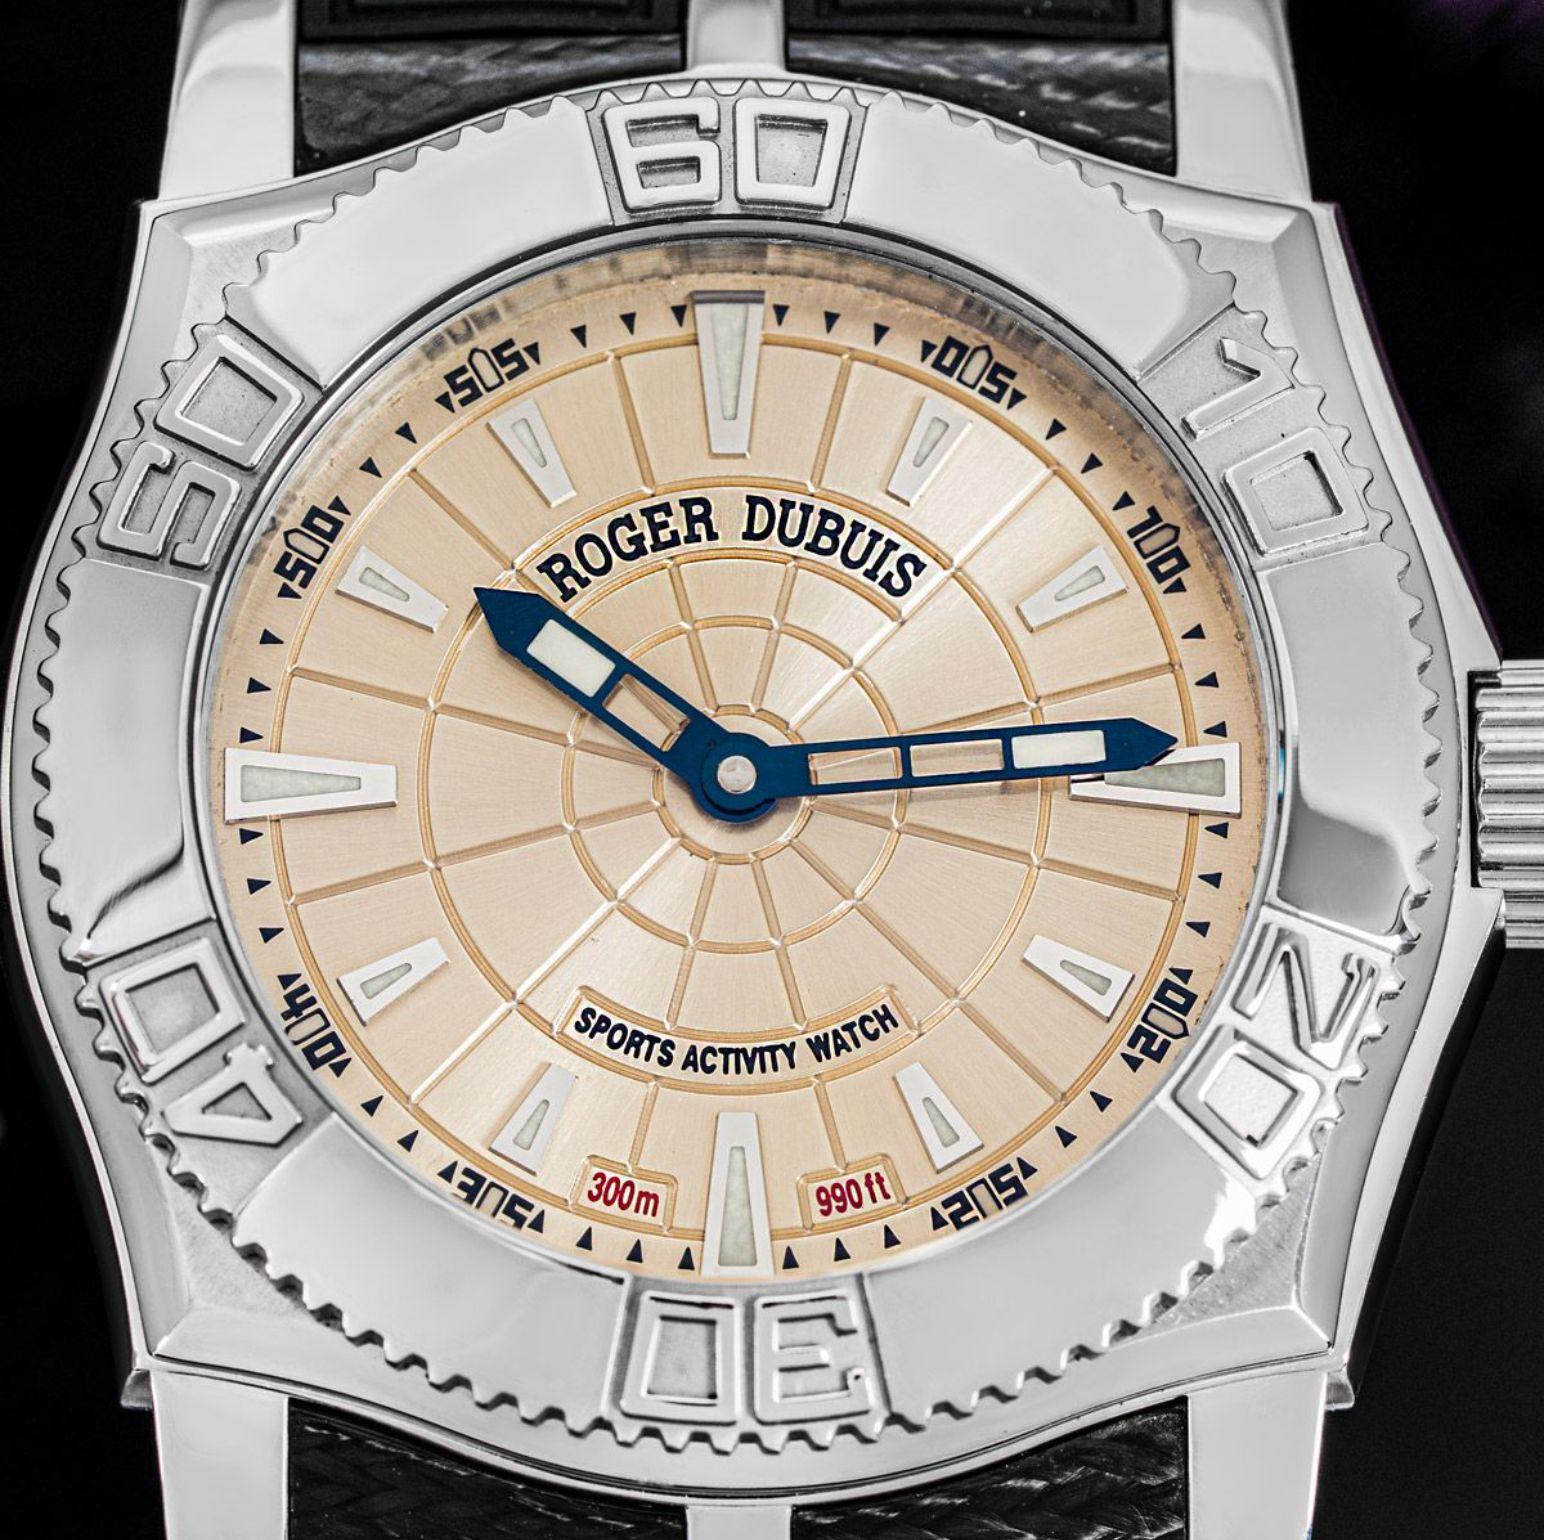 A mens Easy Diver wristwatch crafted in stainless steel by Roger Dubuis. Featuring a champagne dial with applied hour markers and a steel rotating bezel. The watch is also fitted with a sapphire glass, a self-winding movement which can be seen via